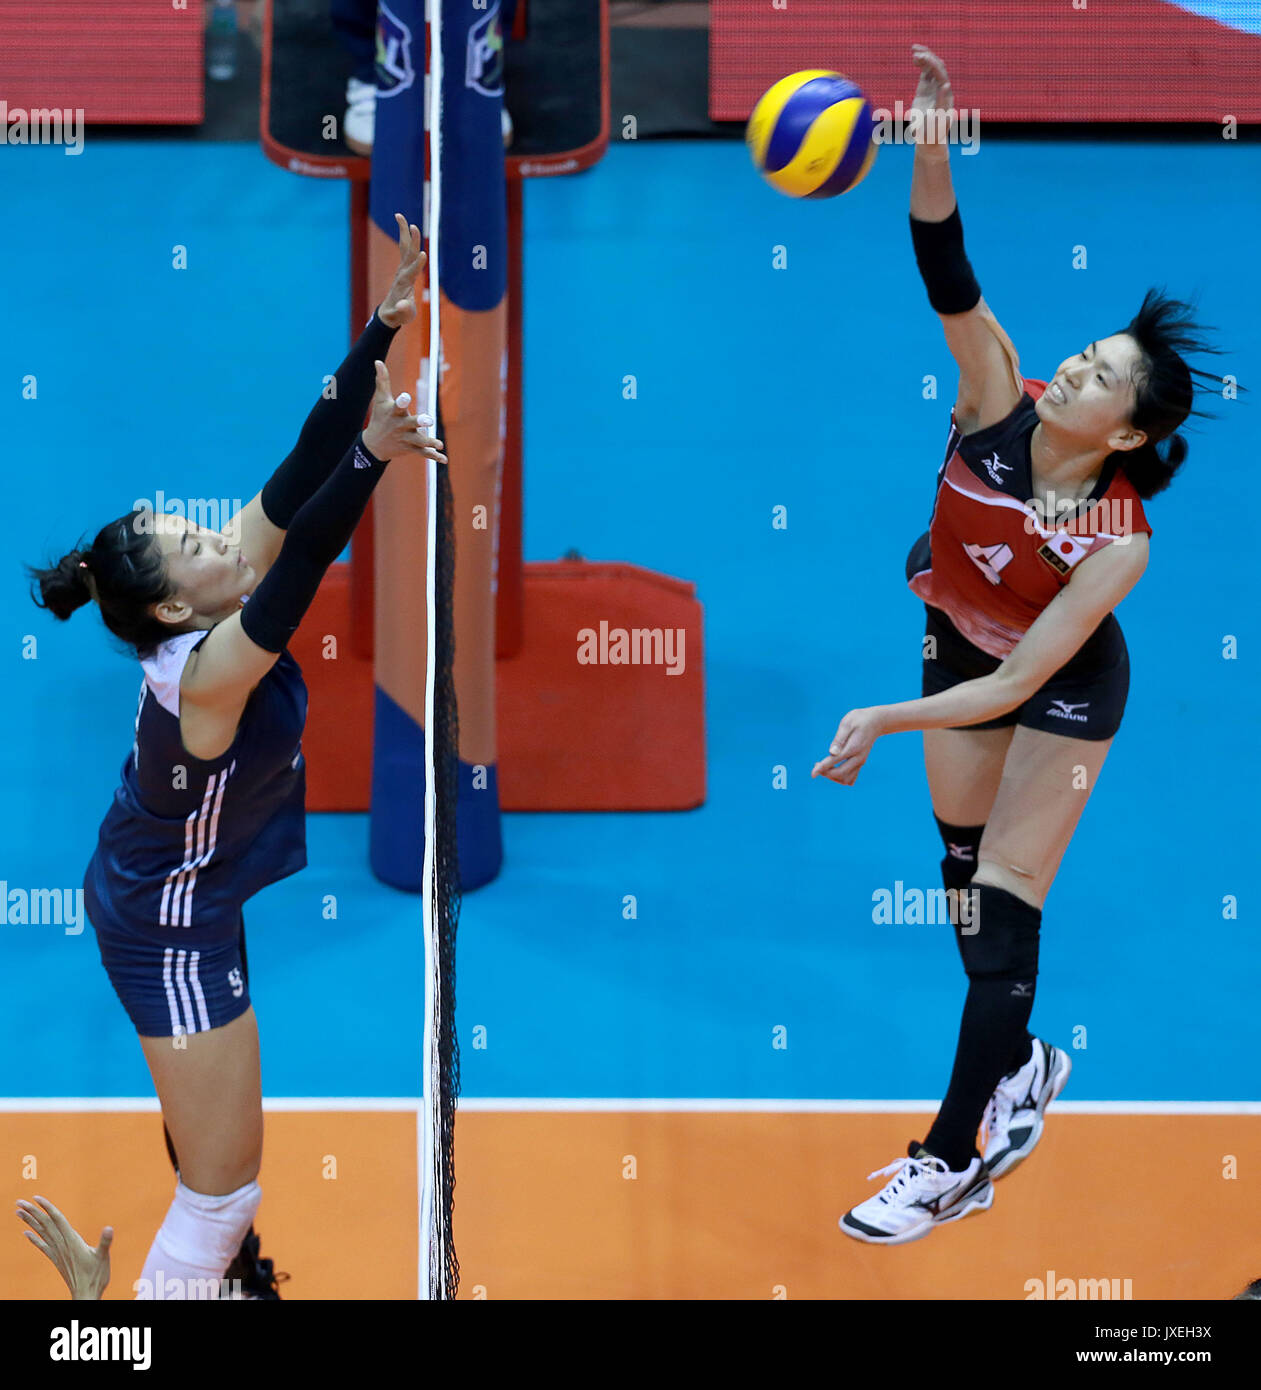 Laguna, Philippines. 16th Aug, 2017. Japan's Risa Shinnabe (R) competes against Jin Ye of China during their semifinals match in the 2017 Asian Women's Volleyball Championship in Laguna Province, the Philippines, Aug. 16, 2017. Japan won 3-0. Credit: Rouelle Umali/Xinhua/Alamy Live News Stock Photo